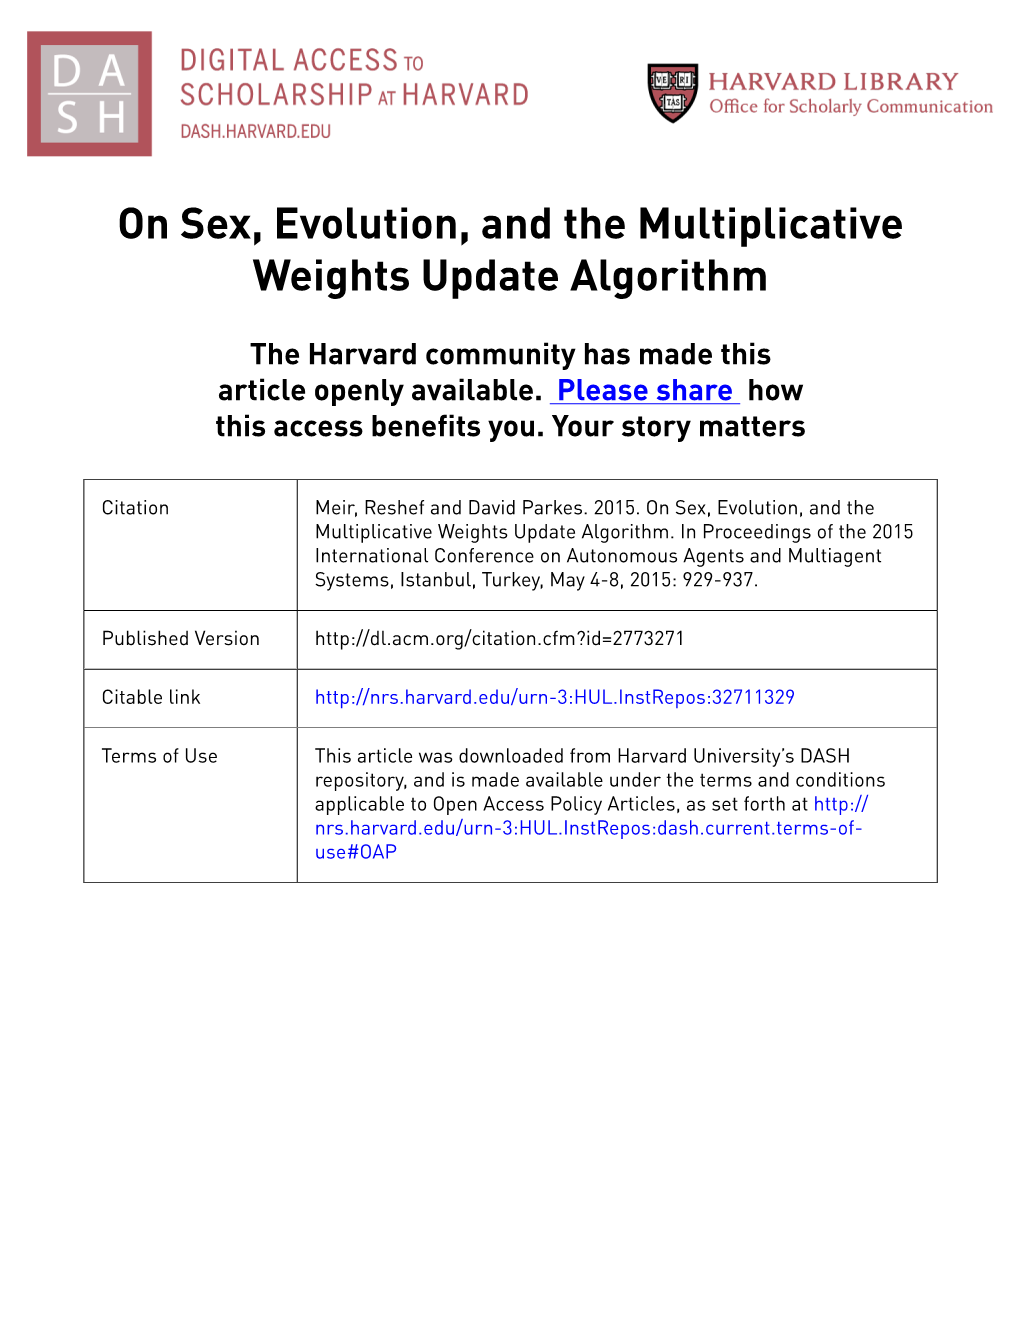 On Sex, Evolution, and the Multiplicative Weights Update Algorithm